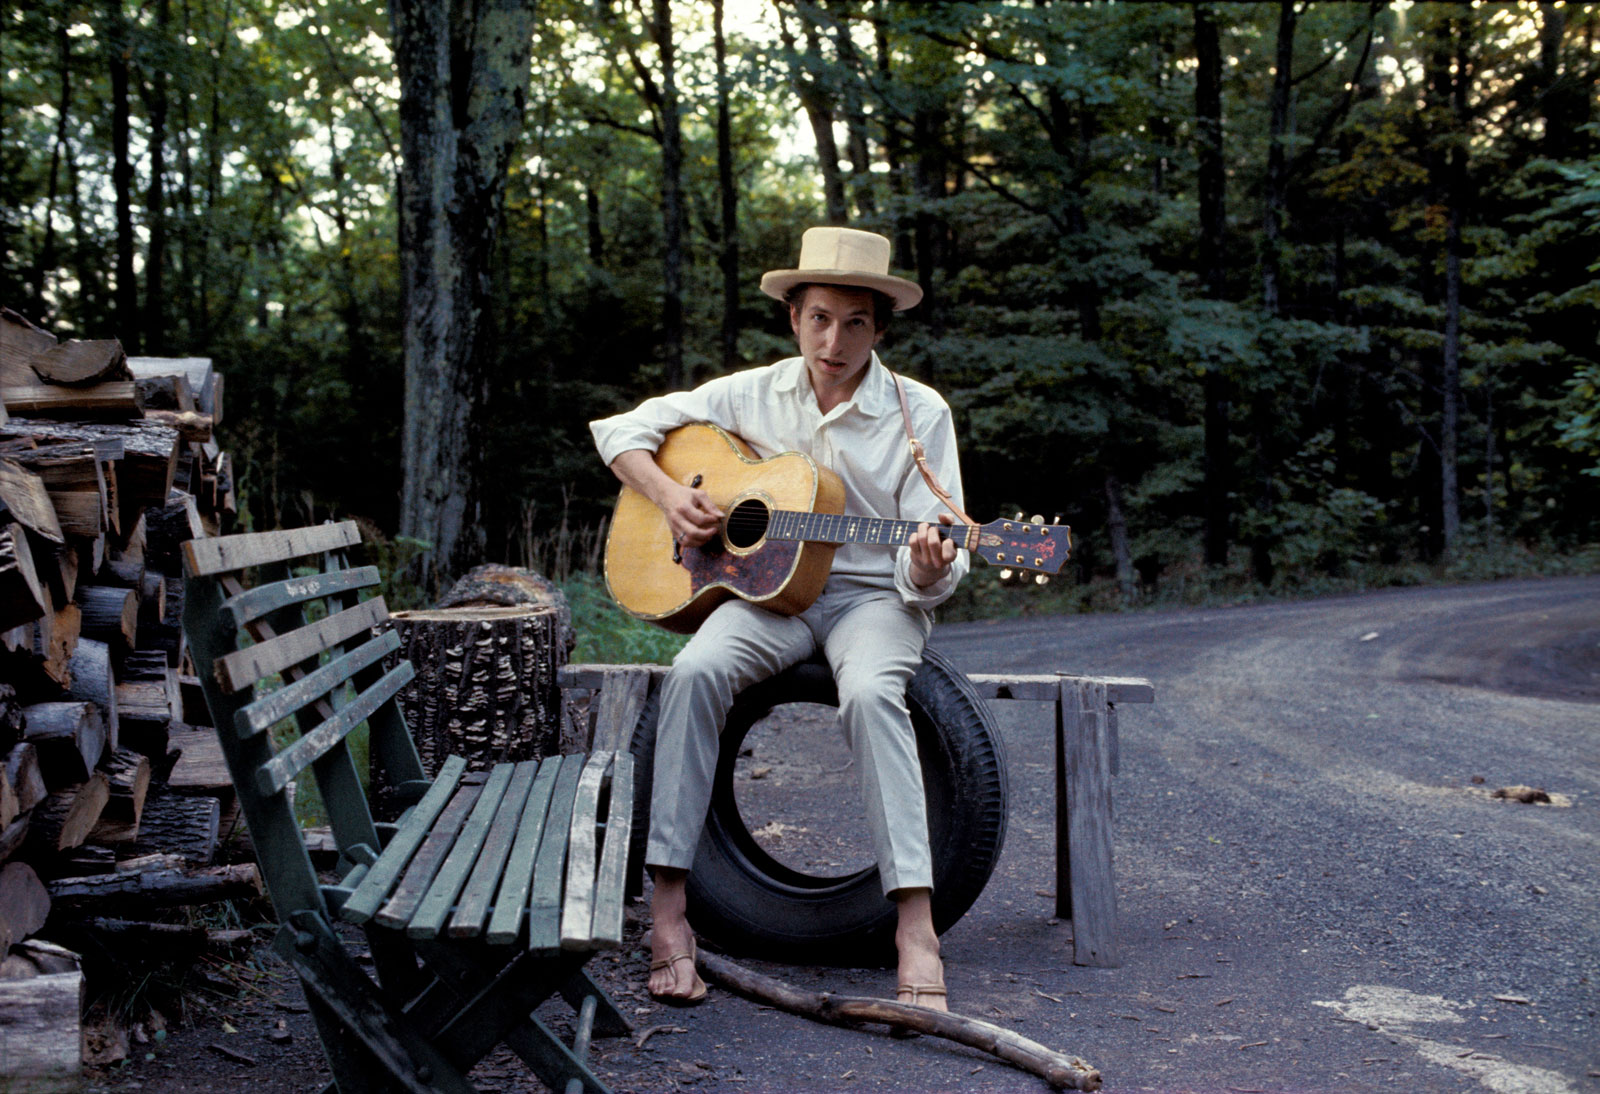 Bob Dylan outside his Byrdcliff home, Woodstock, New York, 1968